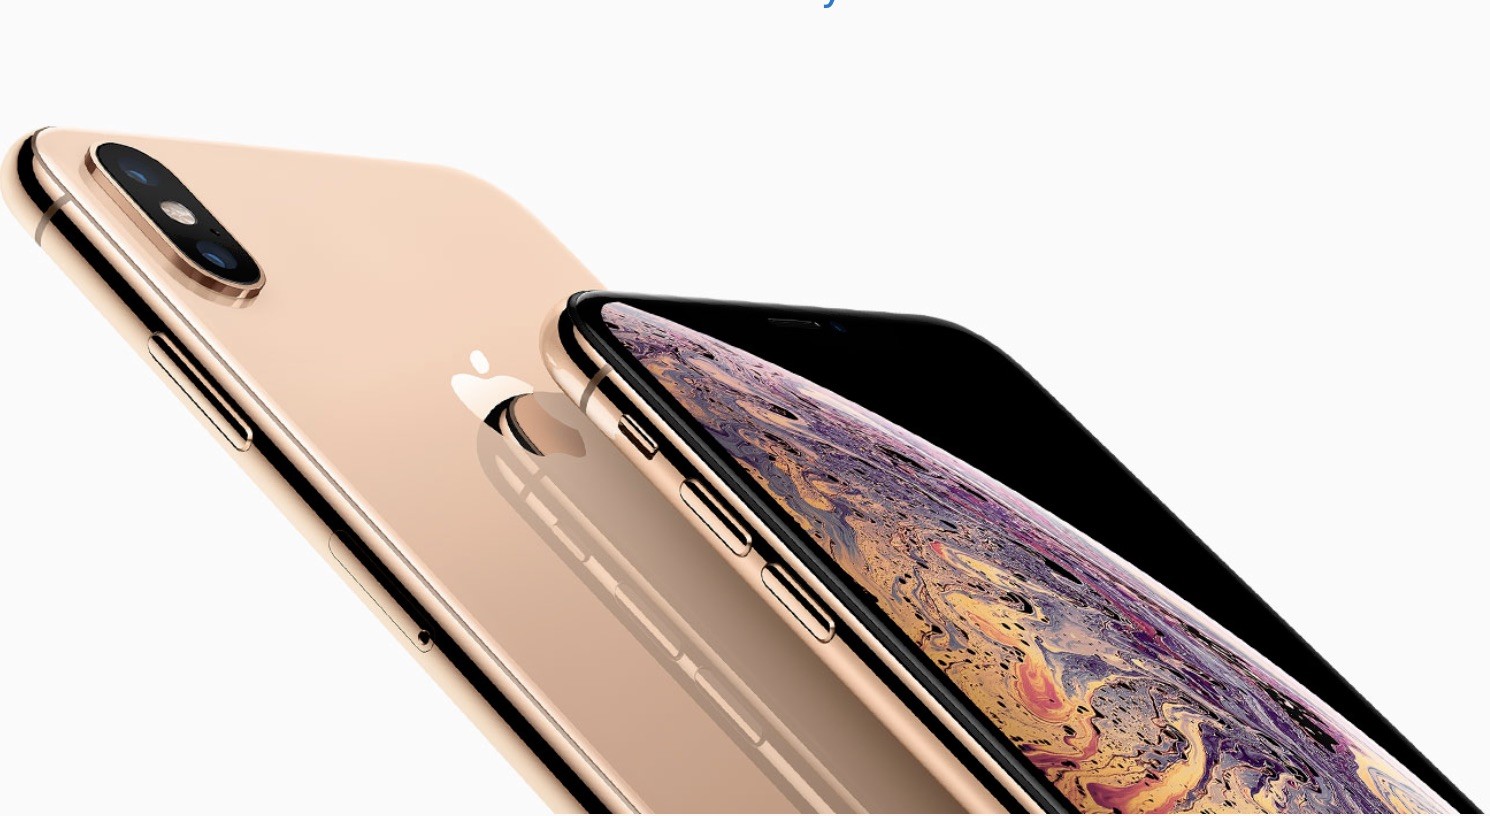 Apple Could Unveil the iPhone 11 on September 10th, According to iOS 13 Beta